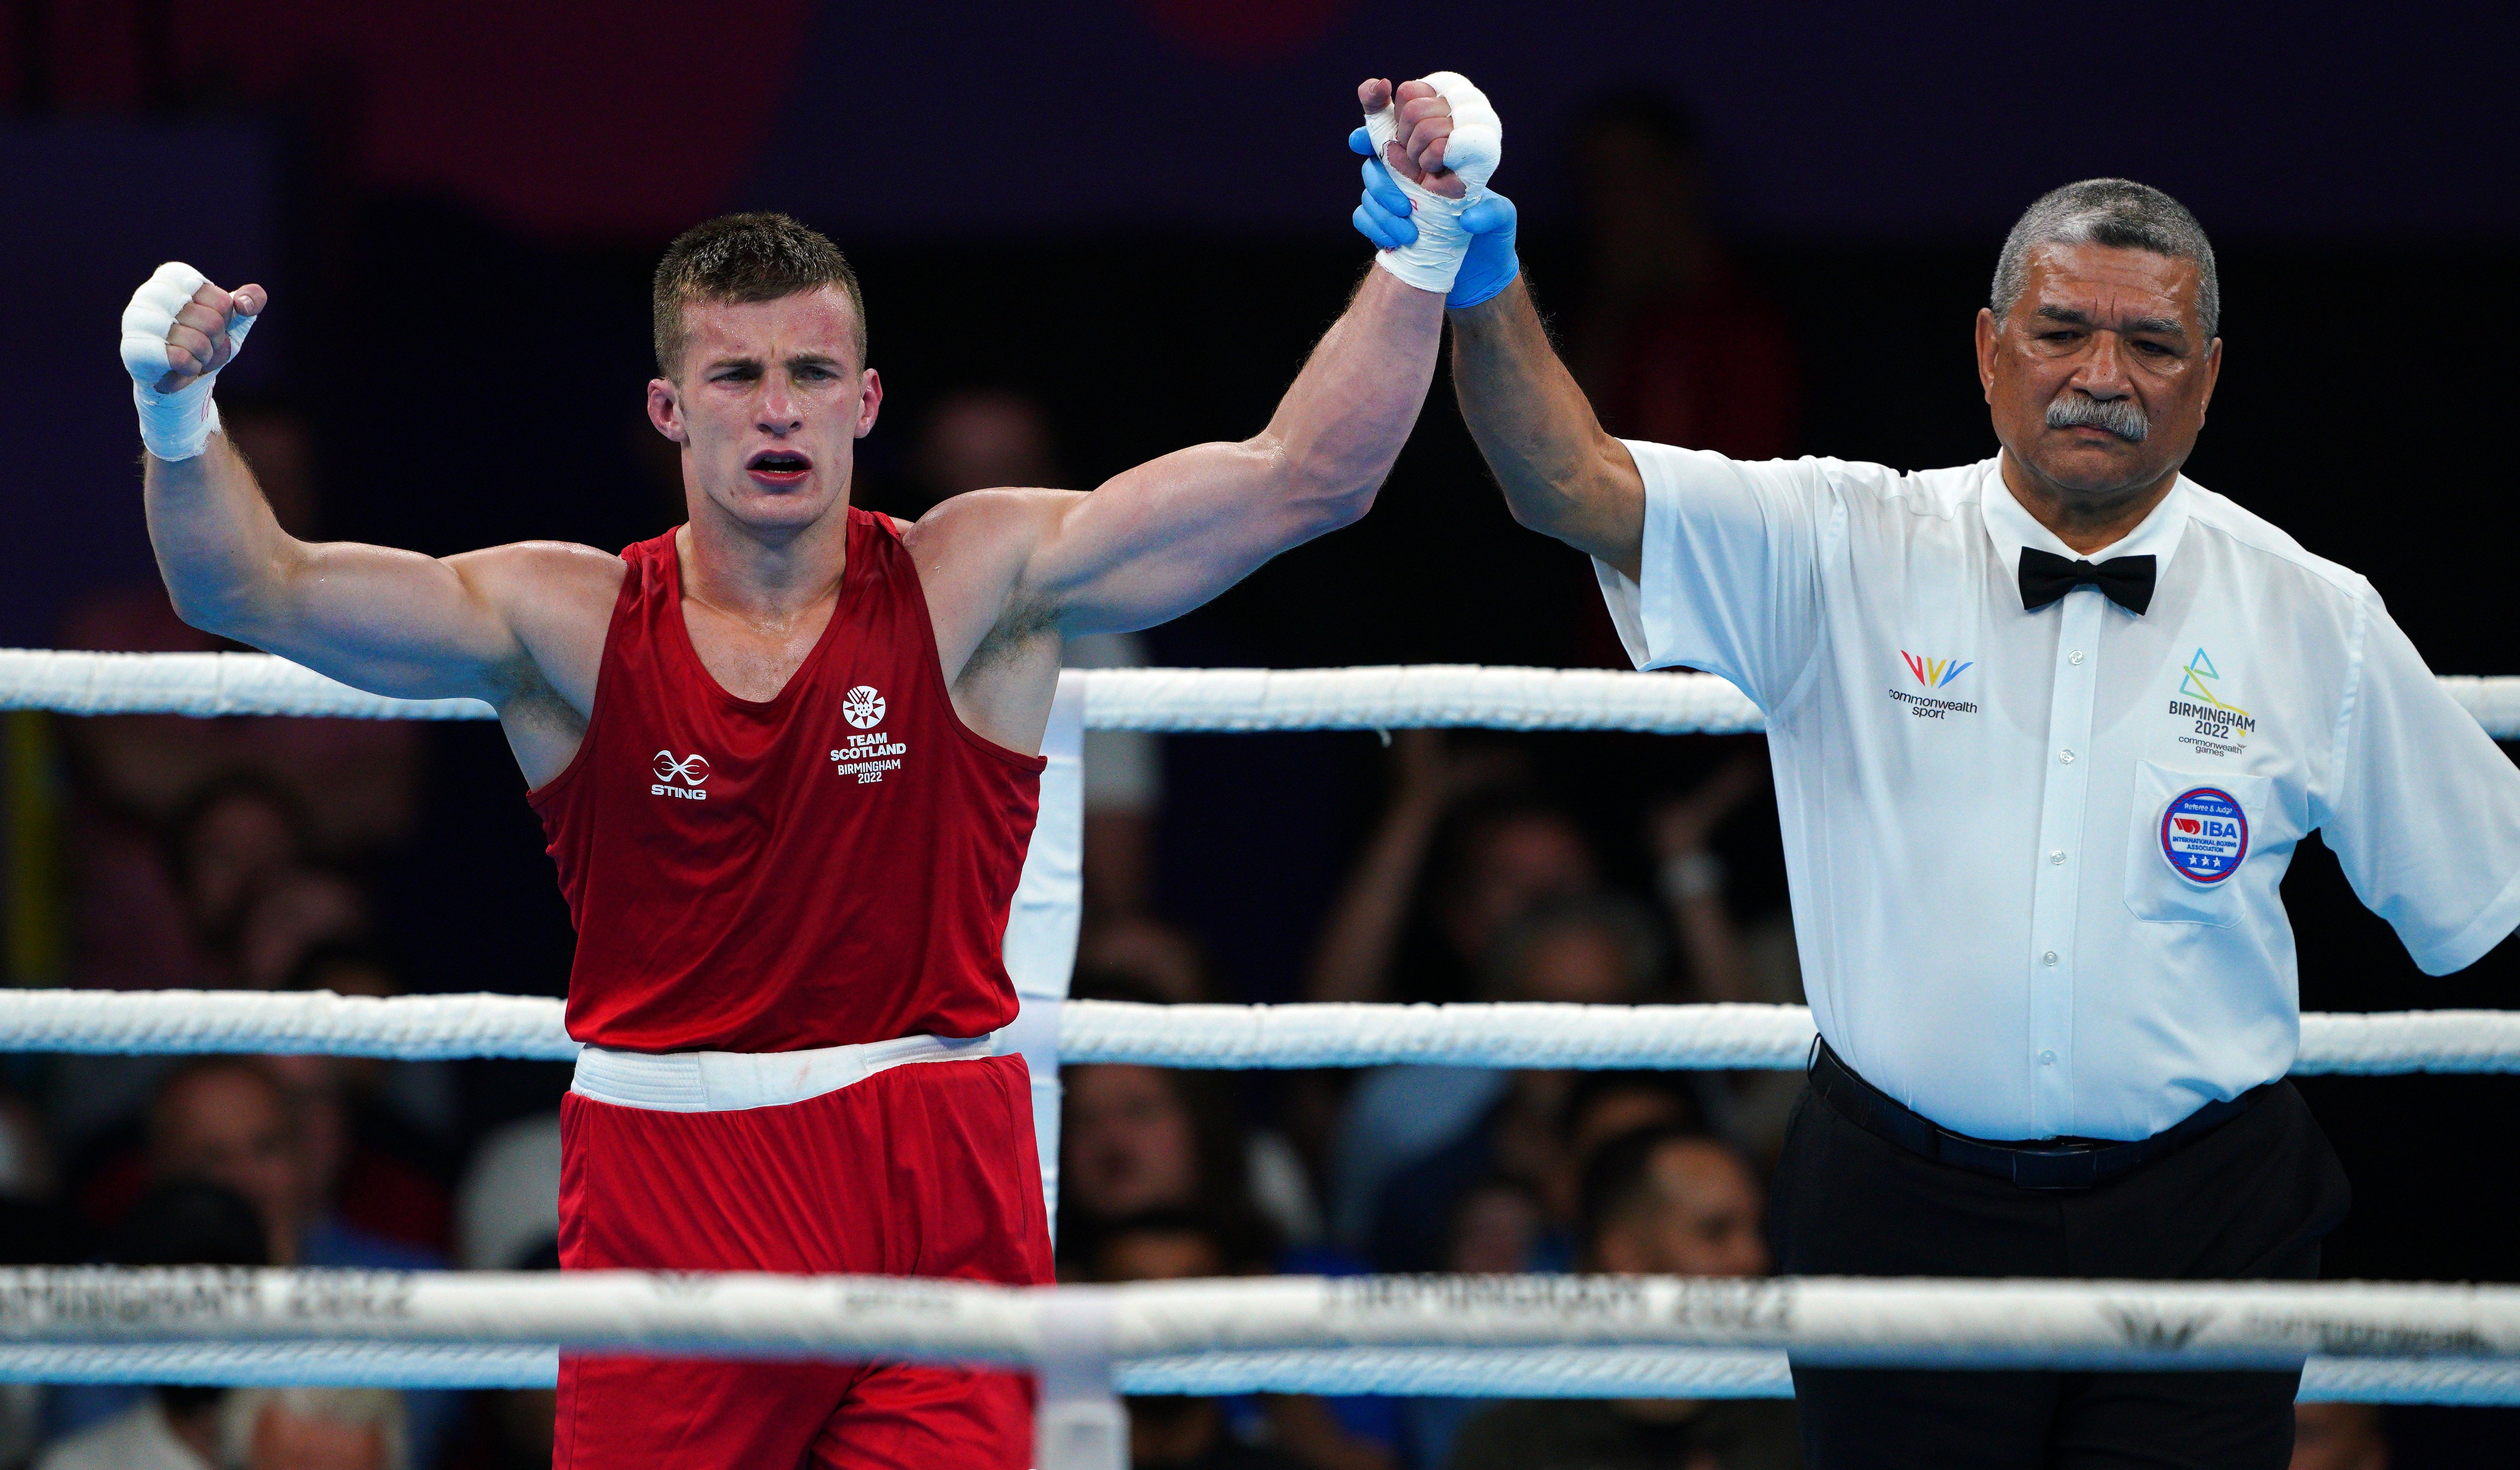 Sean Lazzerini also secured gold for Scotland (Peter Byrne/PA)